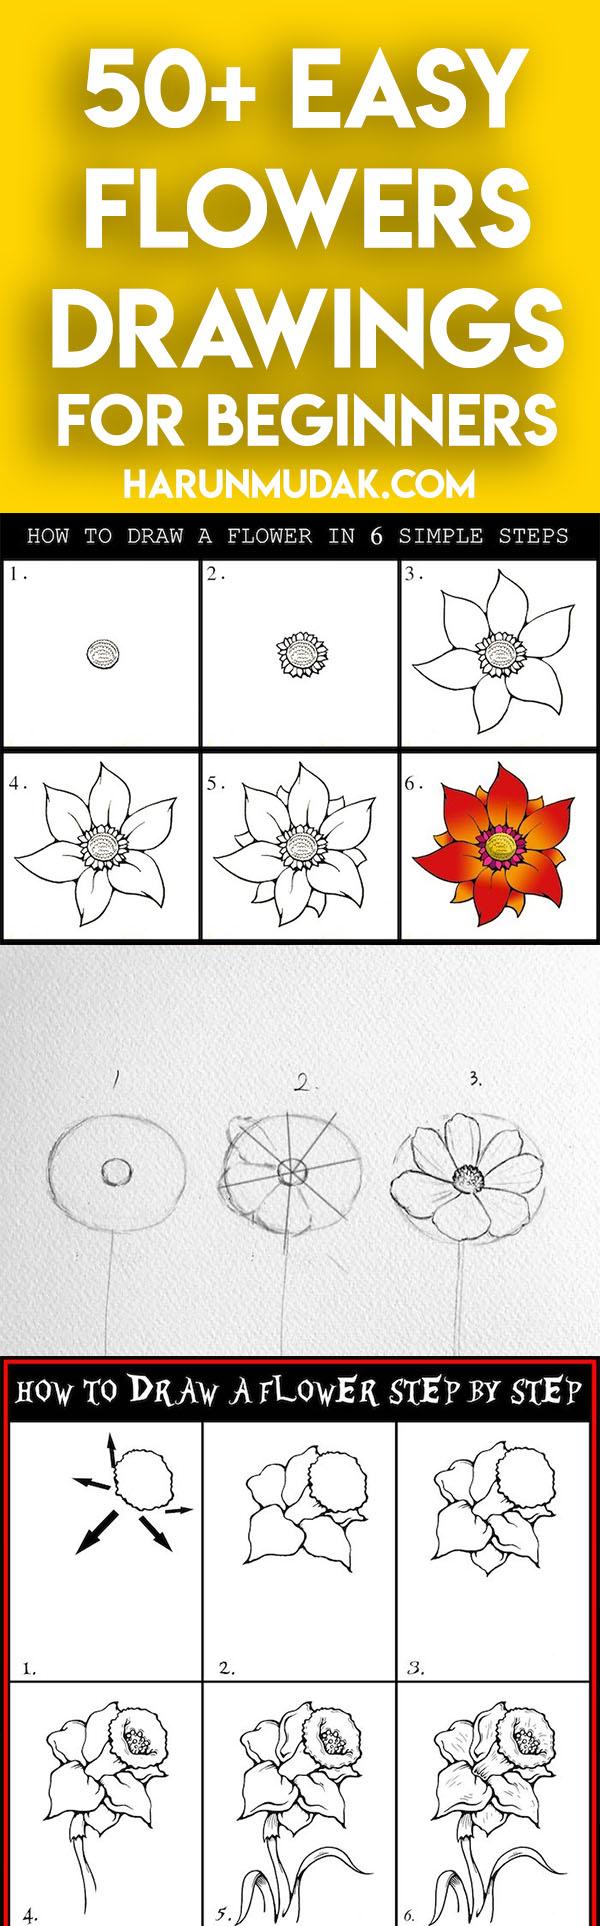 How to Draw a Bouquet of Roses VIDEO & Step-by-Step Pictures